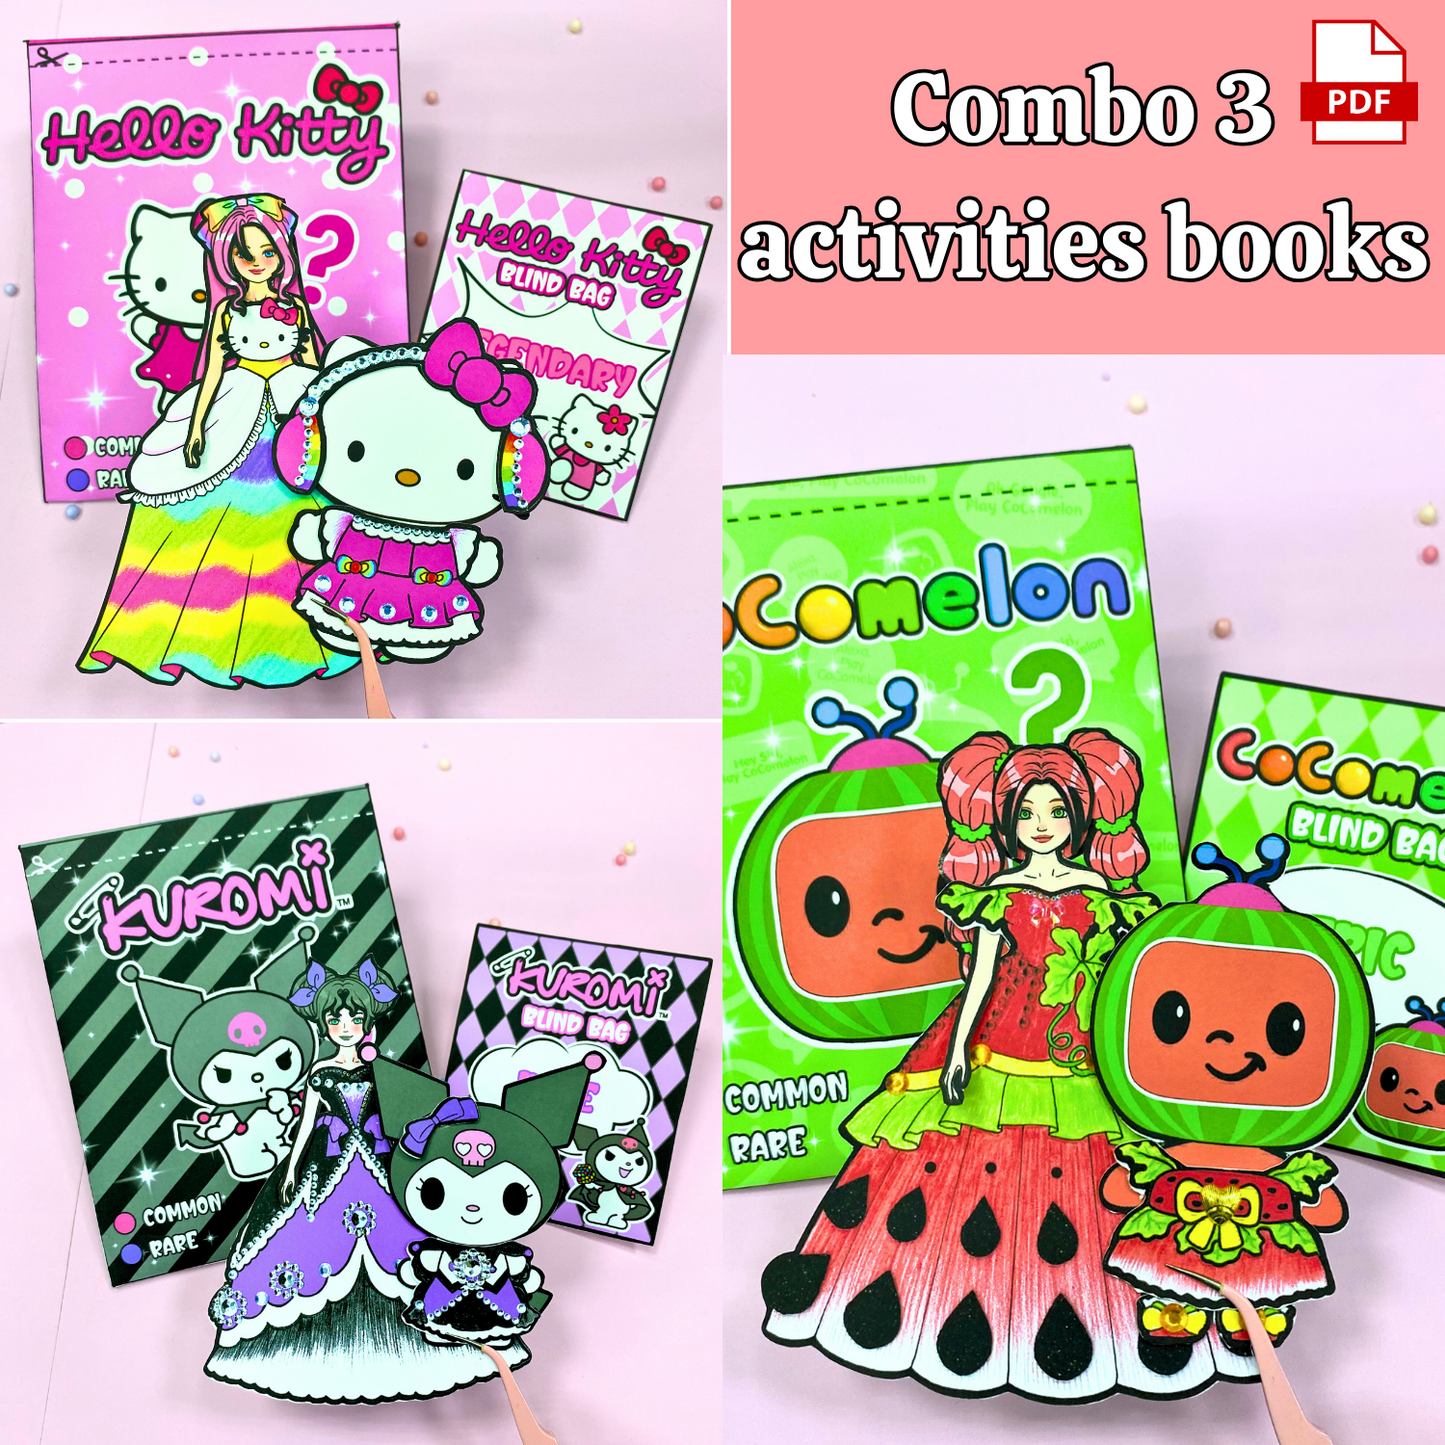 Education Activity Book | Printable Kitty Blind Bags, DIY crafts, Paper Dolls, Activities for Toddlers, Activity Pages, Instant Download